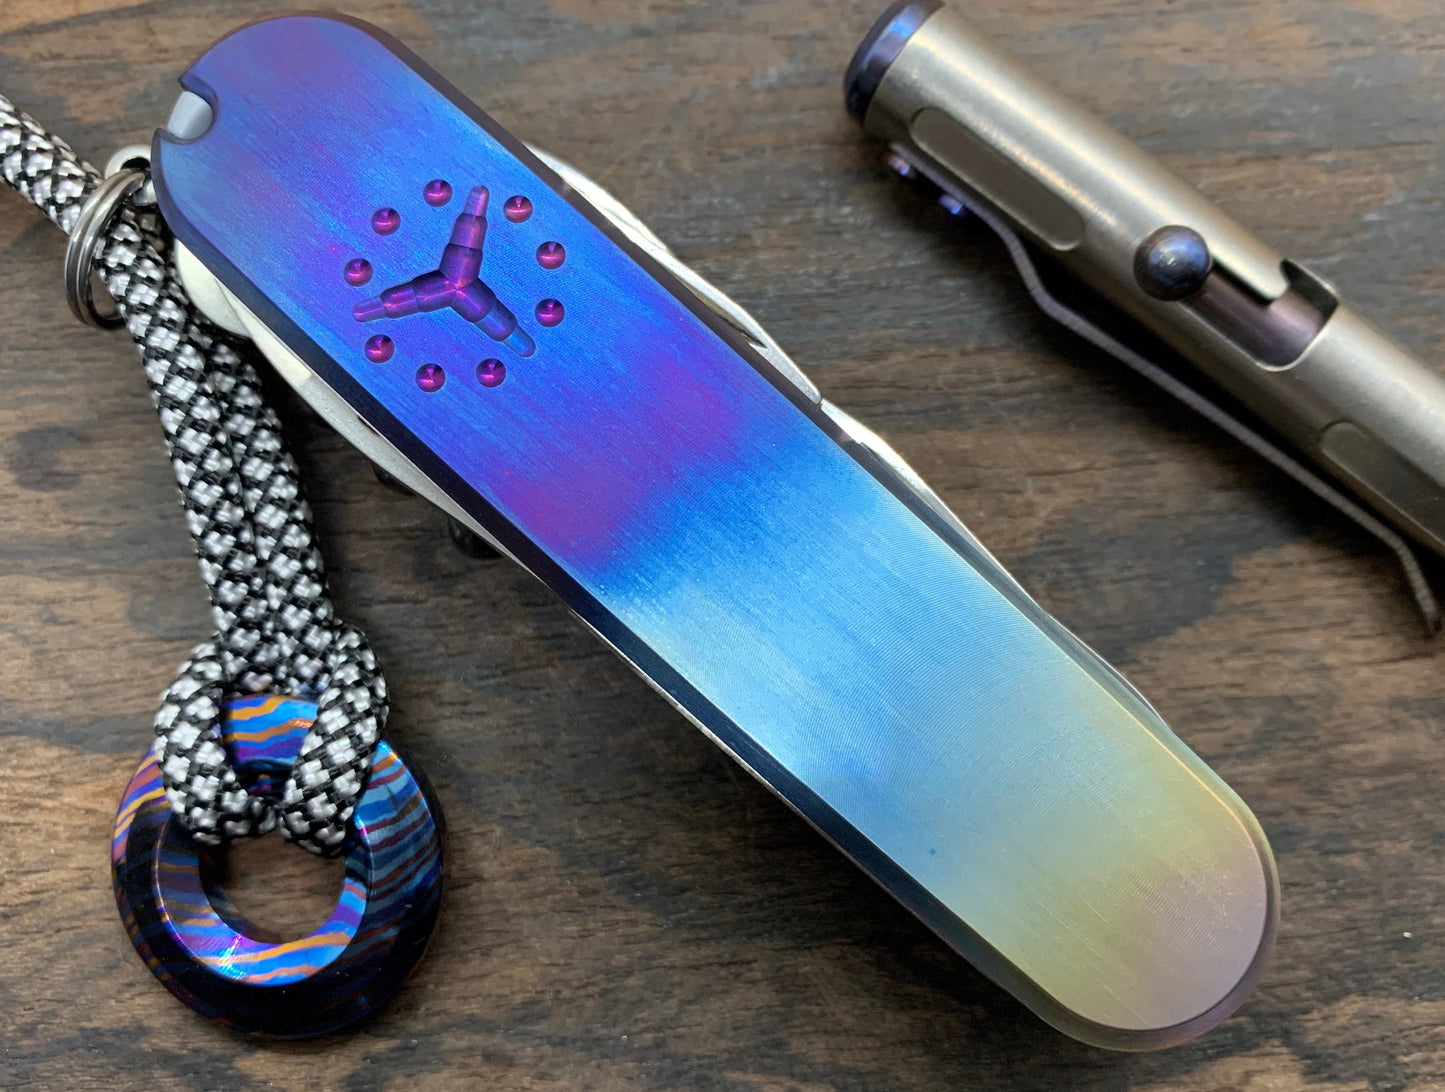 91mm FLAMED Brushed Titanium Scales for Swiss Army SAK91mm